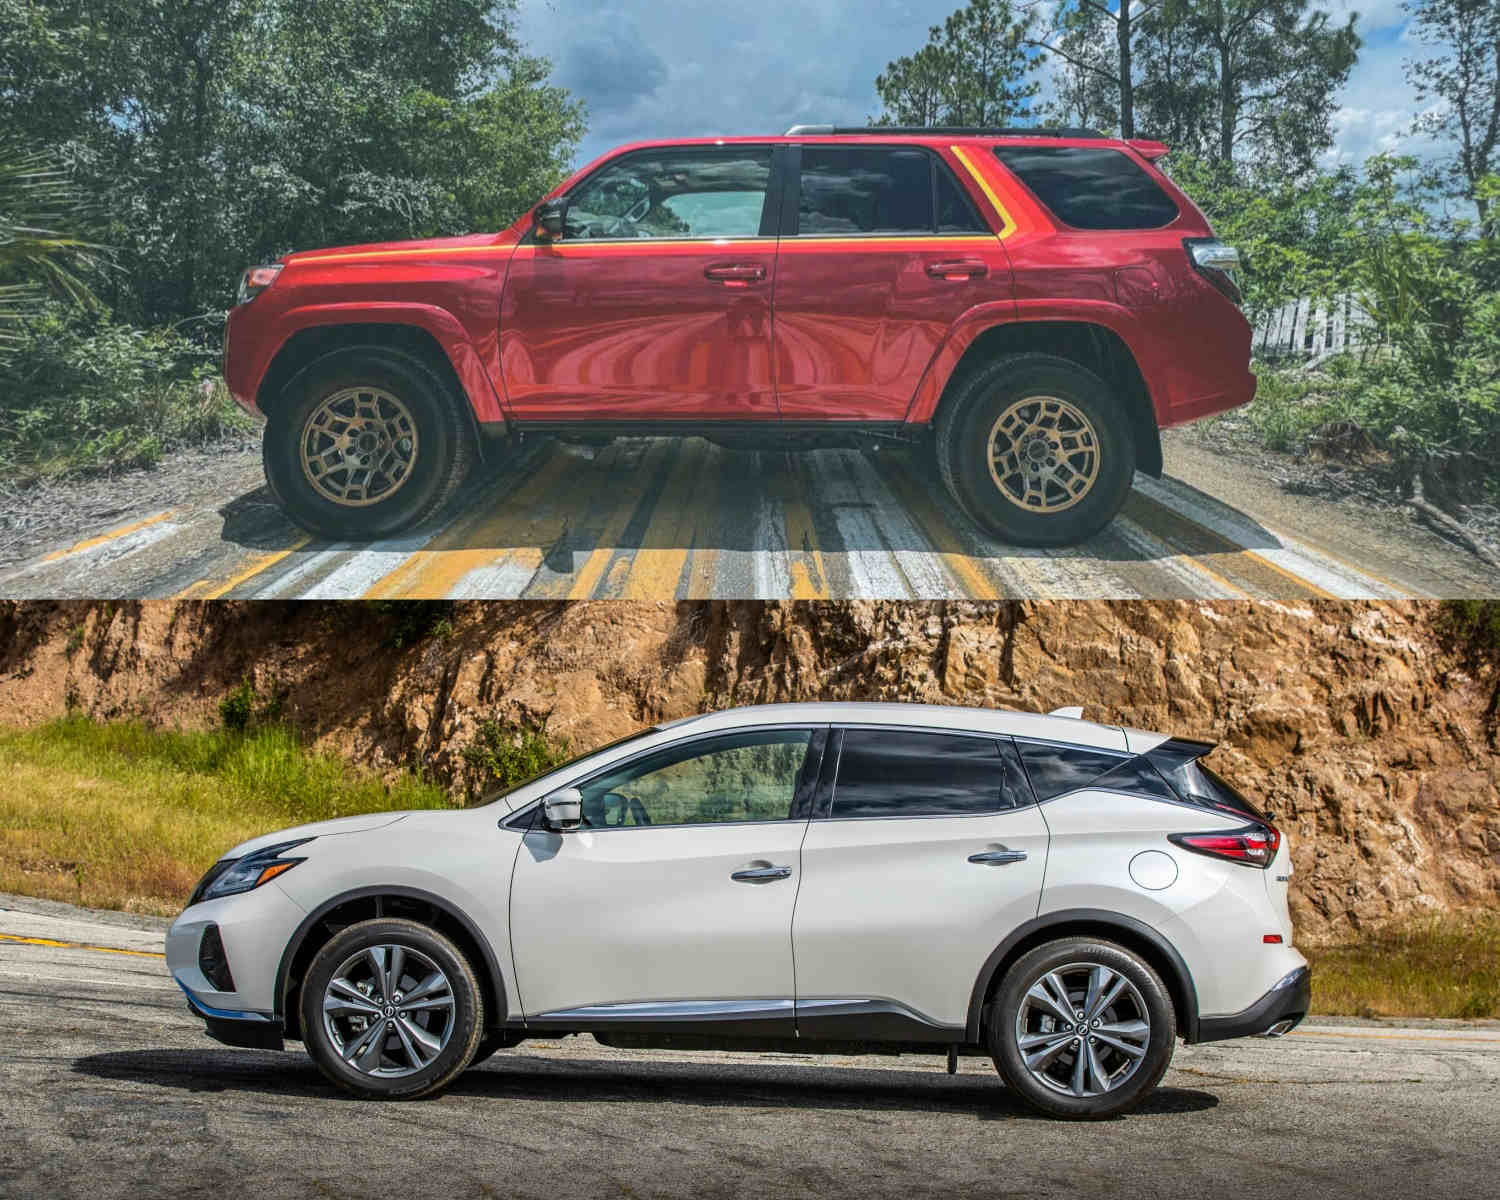 Comparing this 2023 Toyota 4Runner reliability with the 2023 Nissan Murano